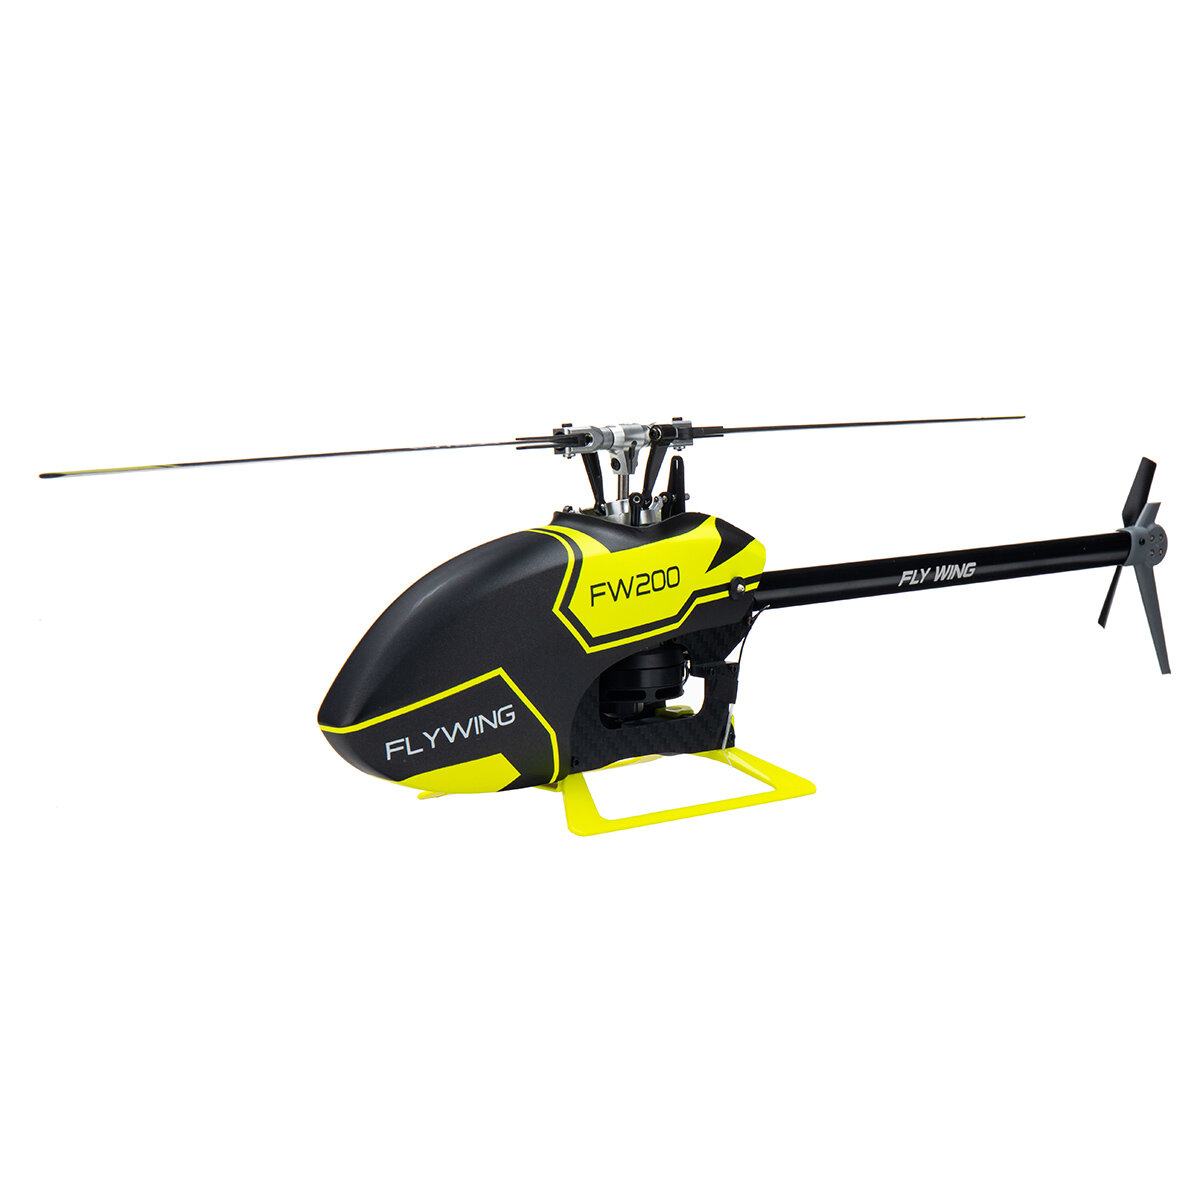 FLY WING FW200 6CH 3D Acrobatics GPS Altitude Hold One-key Return APP Adjust RC Helicopter RTF With H1 V2 Flight Control System COD